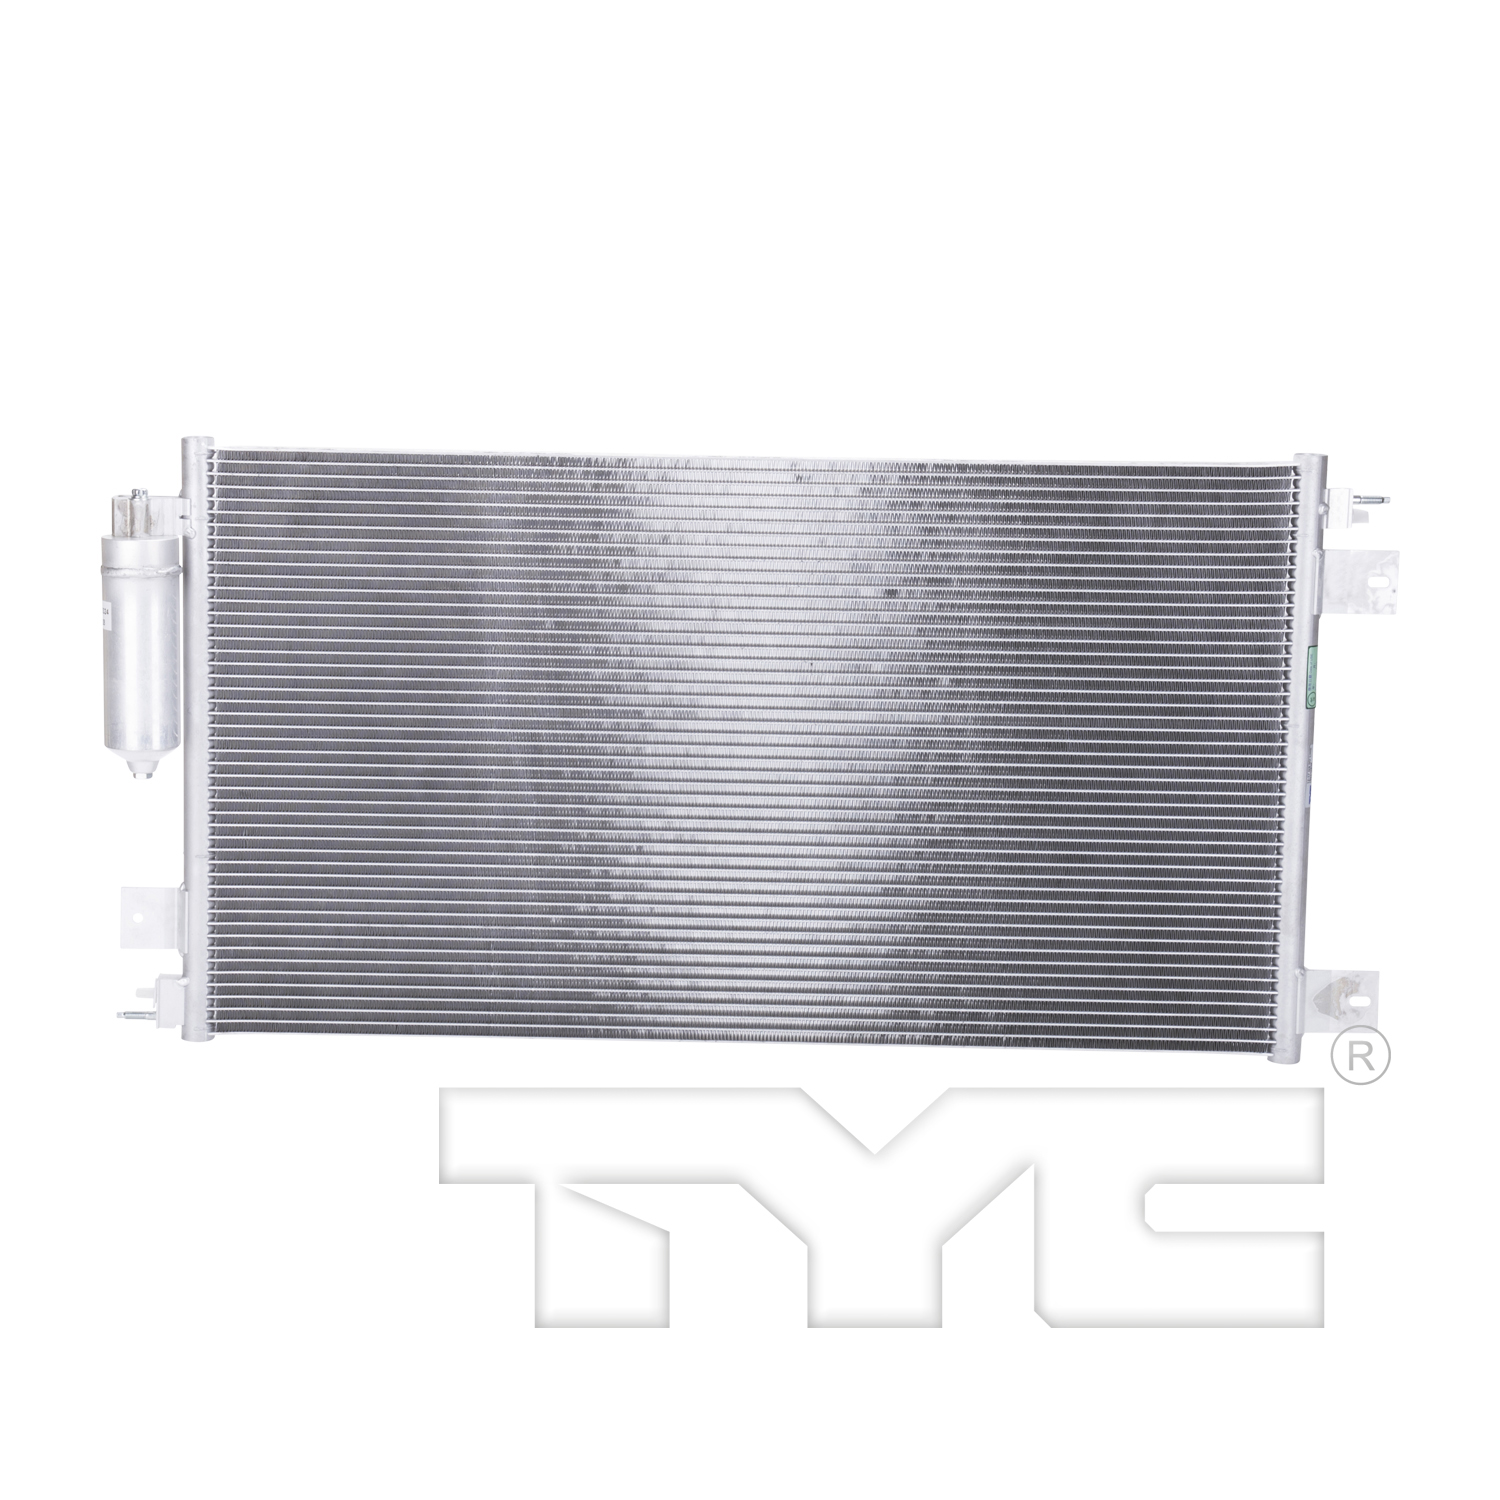 Aftermarket AC CONDENSERS for NISSAN - NV1500, NV1500,12-21,Air conditioning condenser